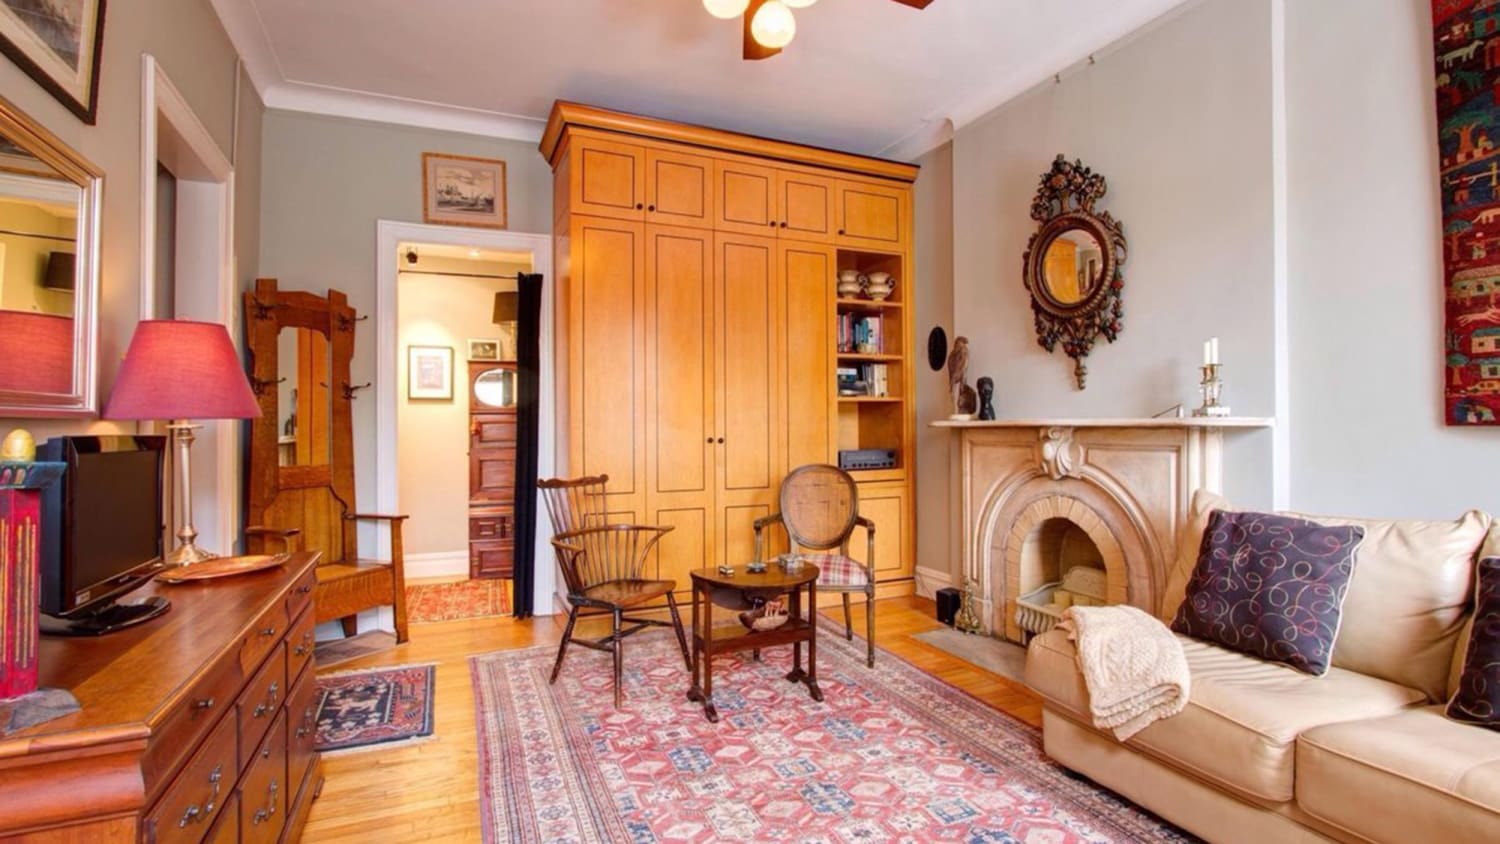 Louis C K s buys NYC  studio apartment   see inside  